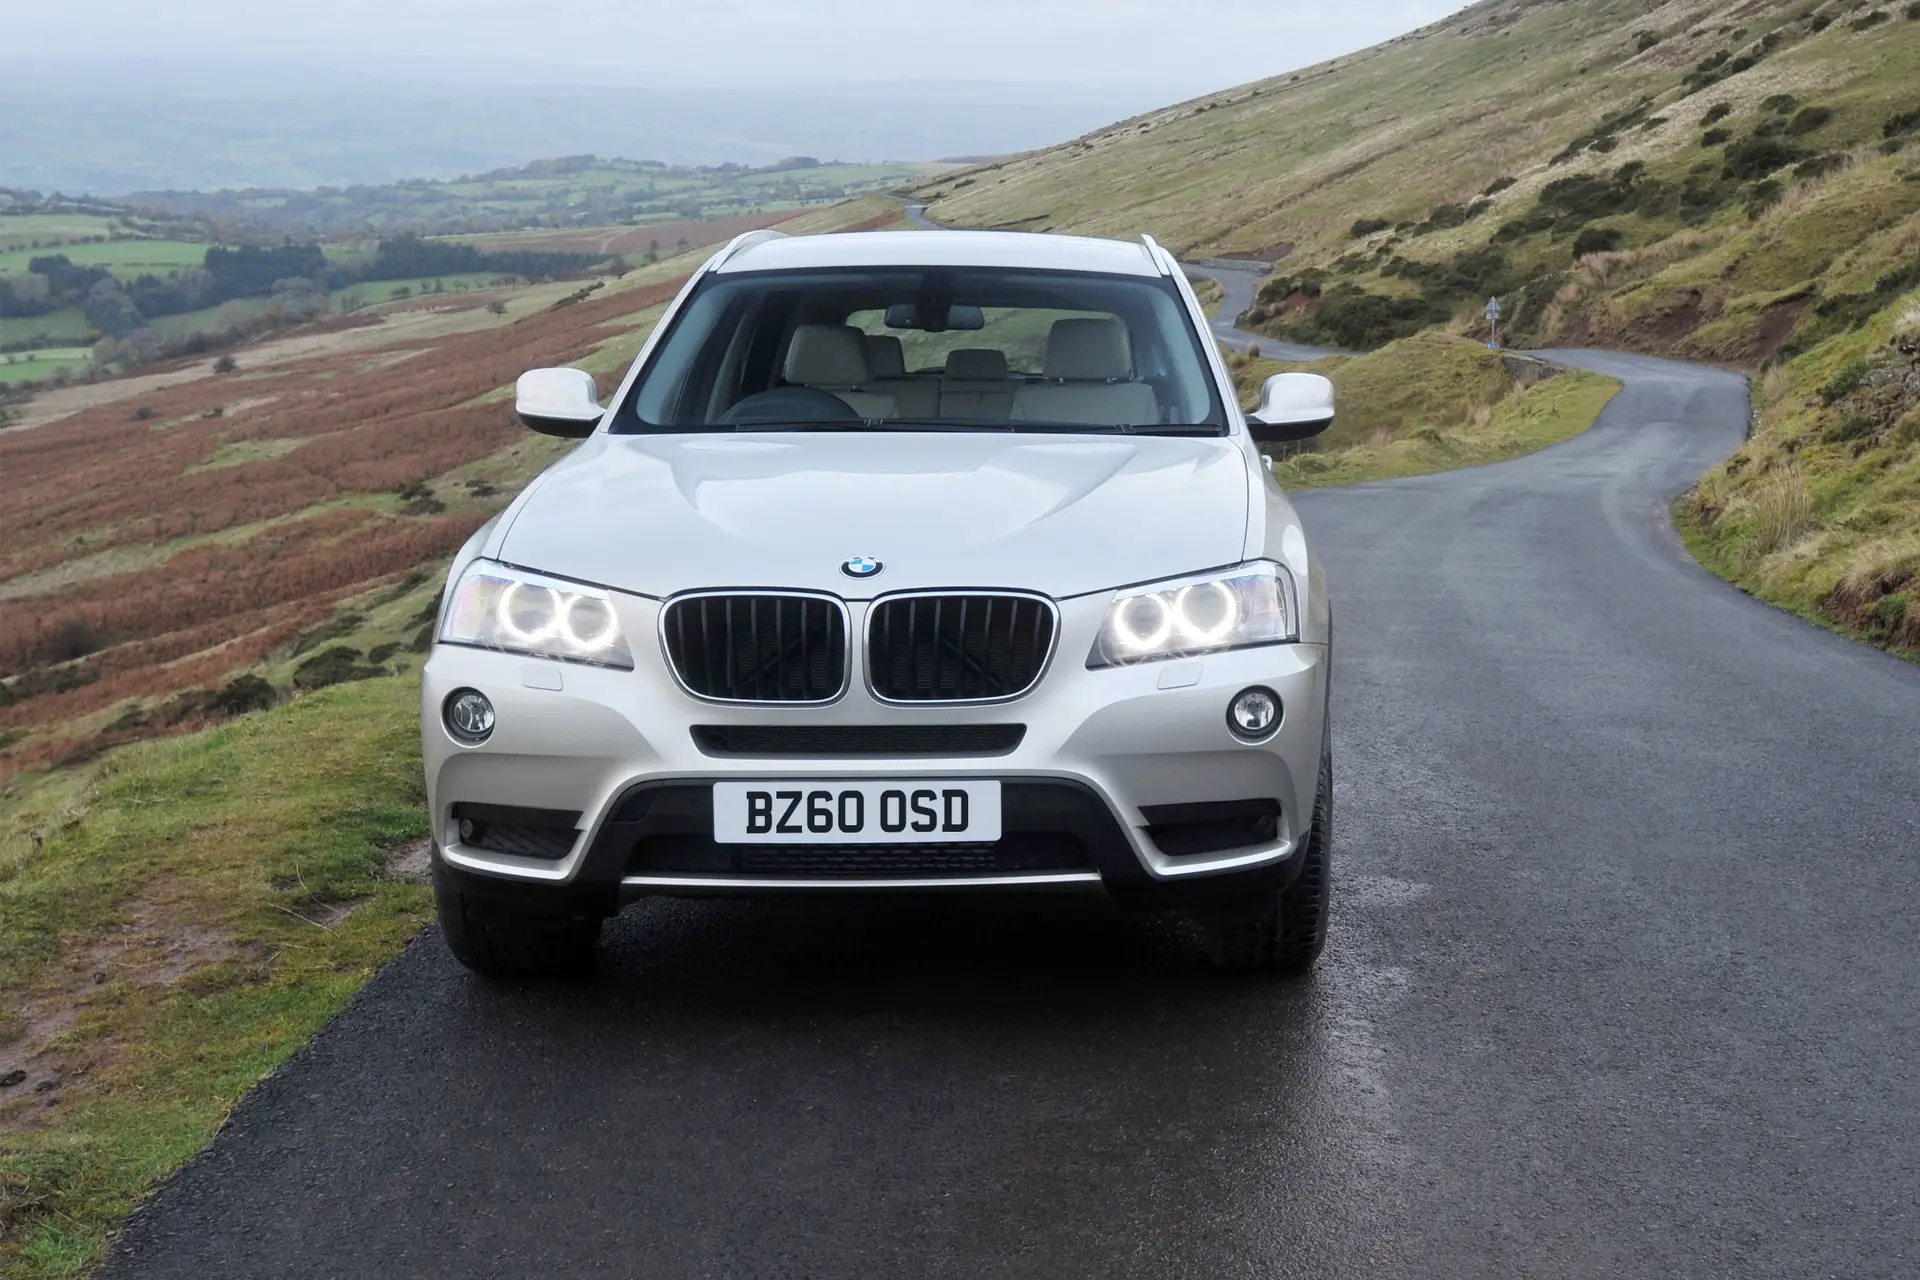 BMW X3 (2010-2018) Review: Exterior front photo of the BMW X3